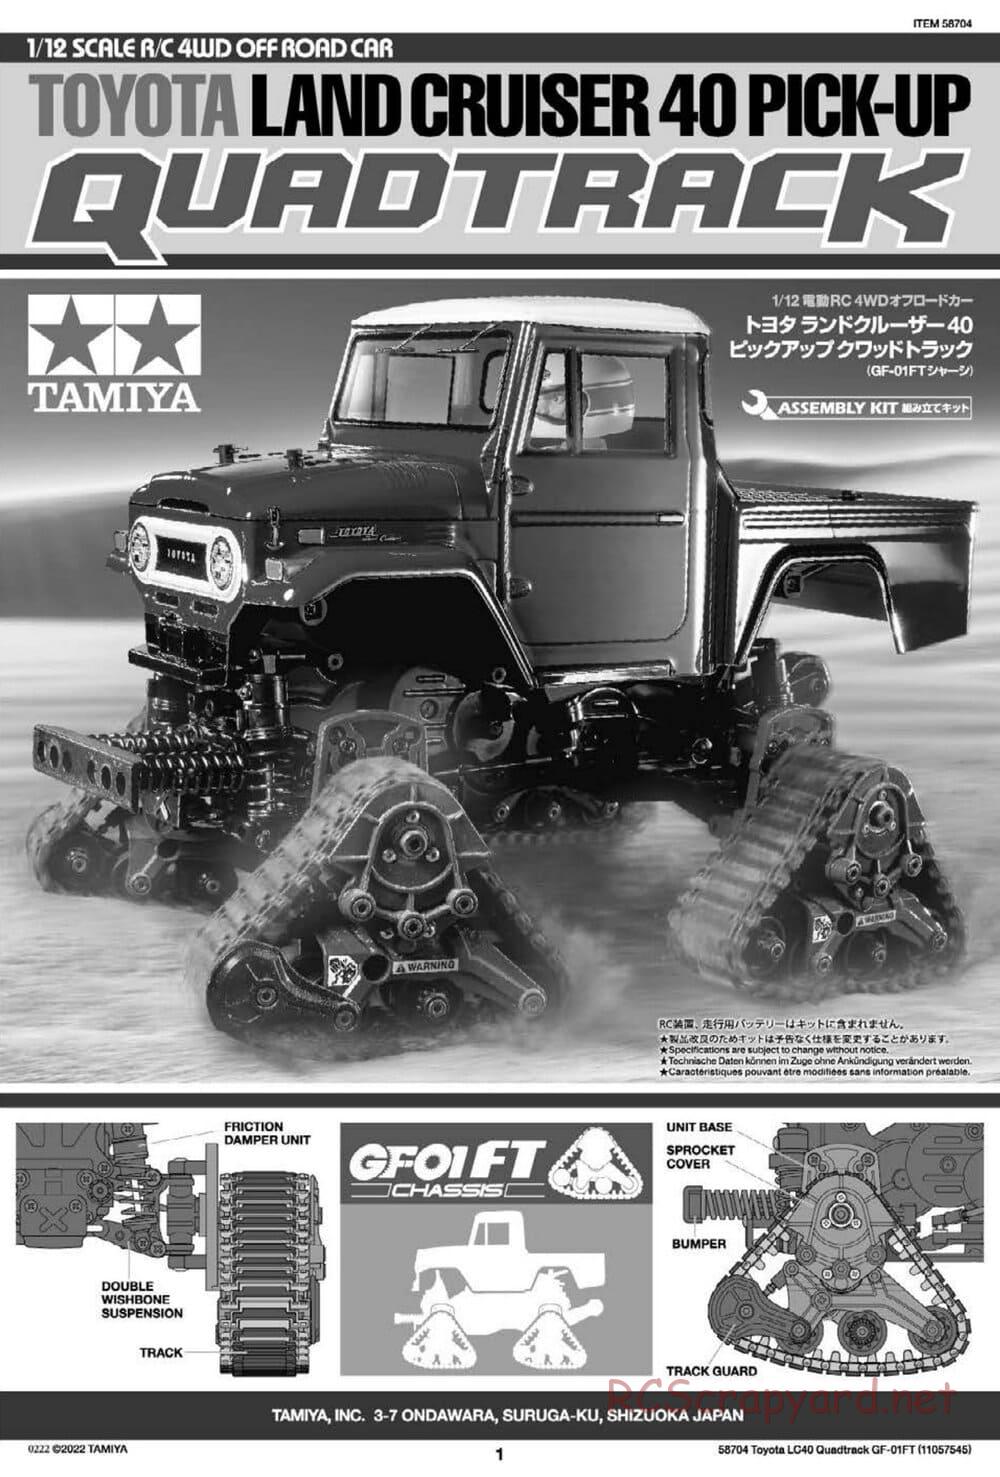 Tamiya - Toyota Land Cruiser 40 Pick-Up Quadtrack - GF-01FT Chassis - Manual - Page 1